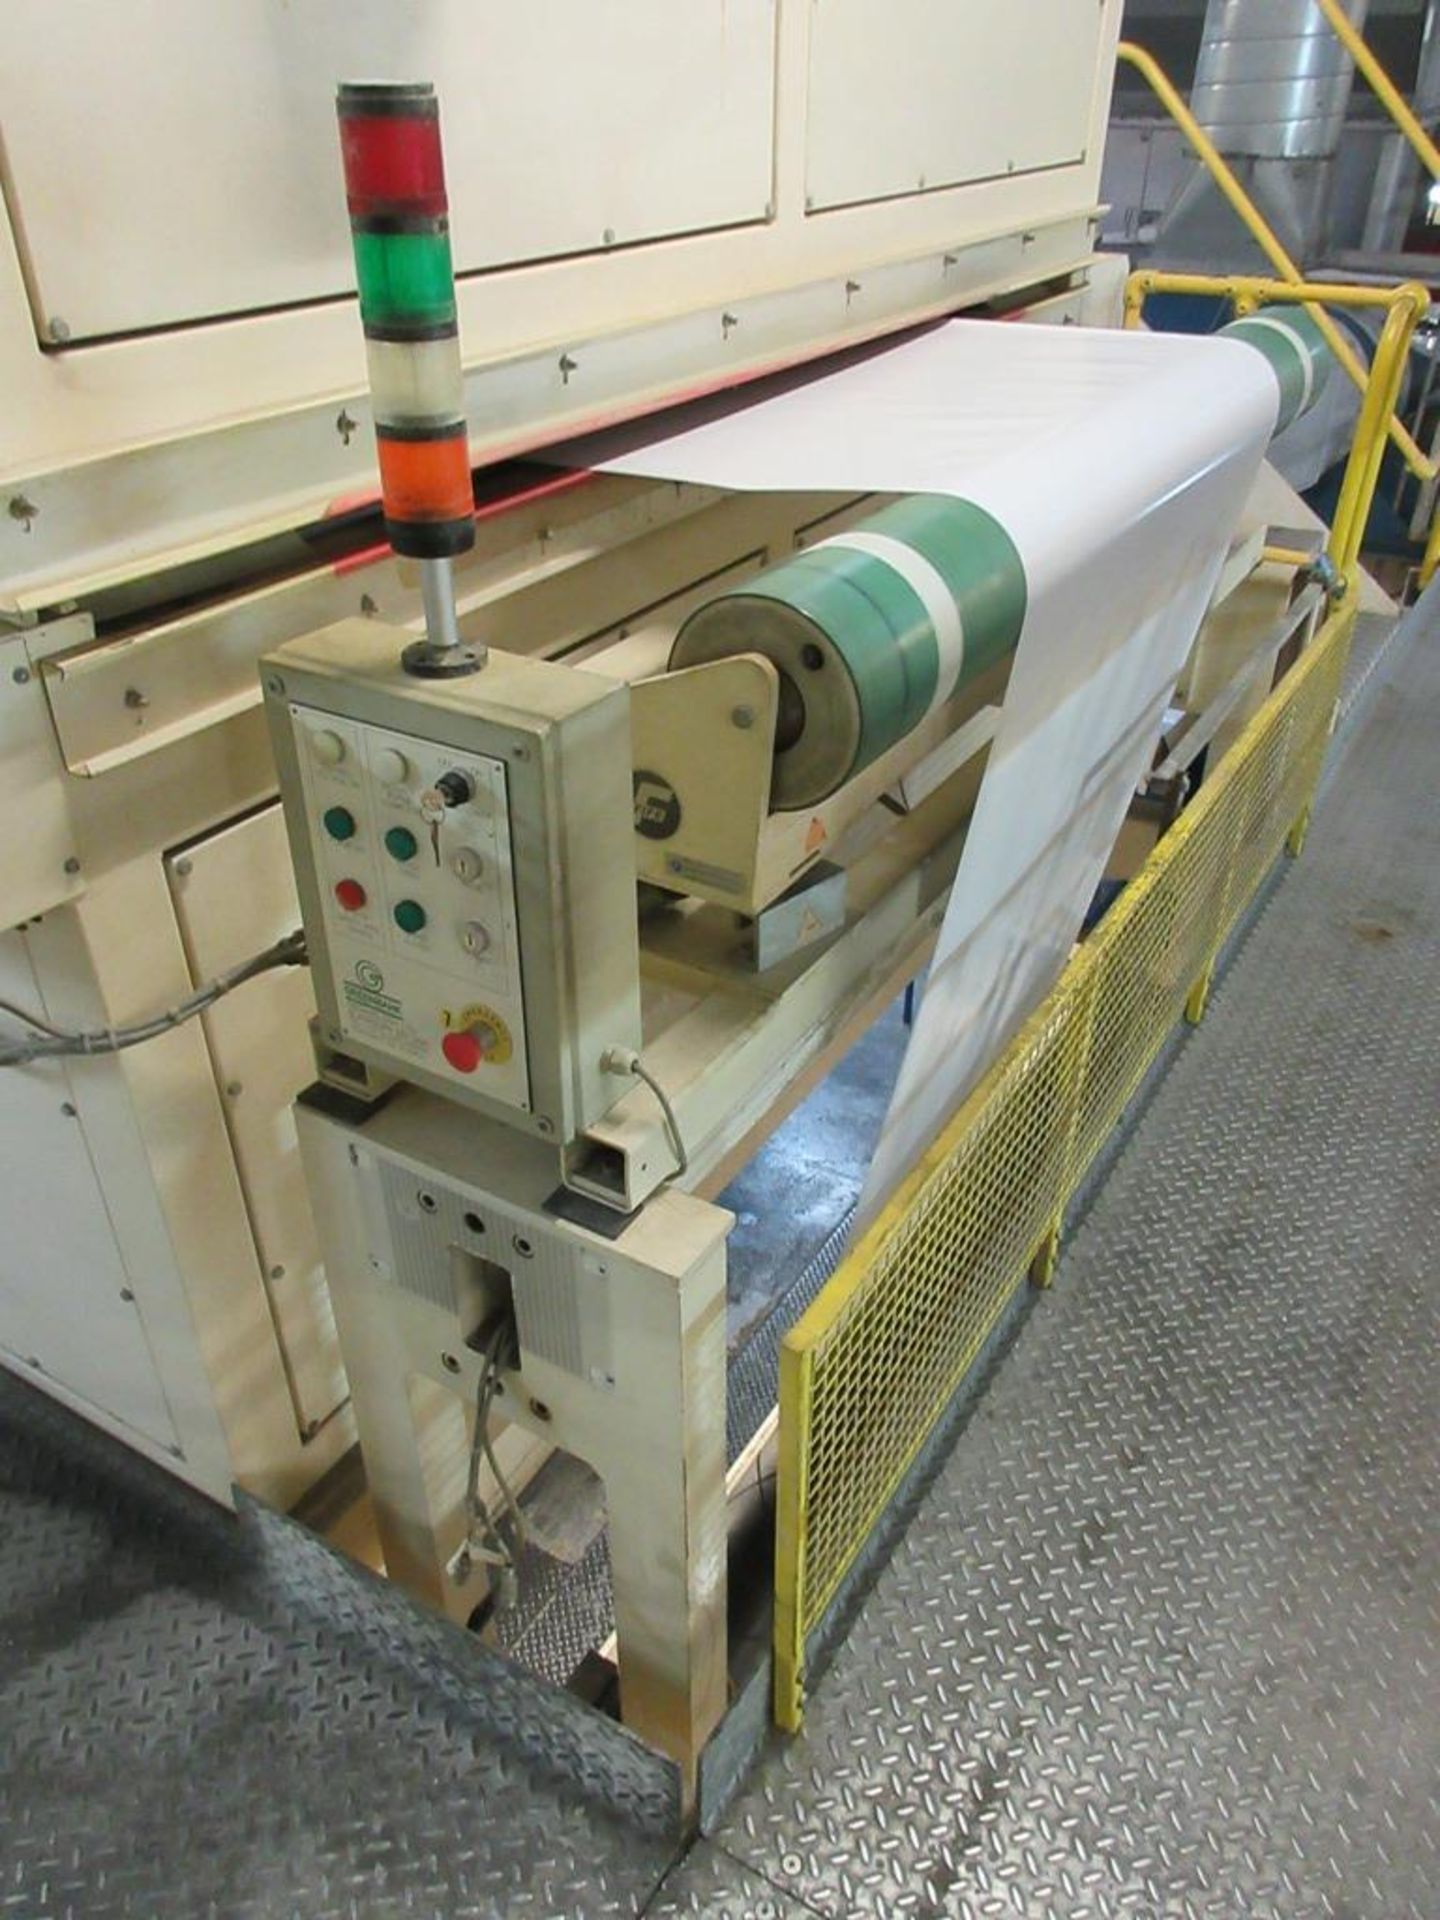 Greenbank primer rolling station and oven, contract ref: 10.226.0 (2000), approx. dimensions 6m x 3m - Image 20 of 38